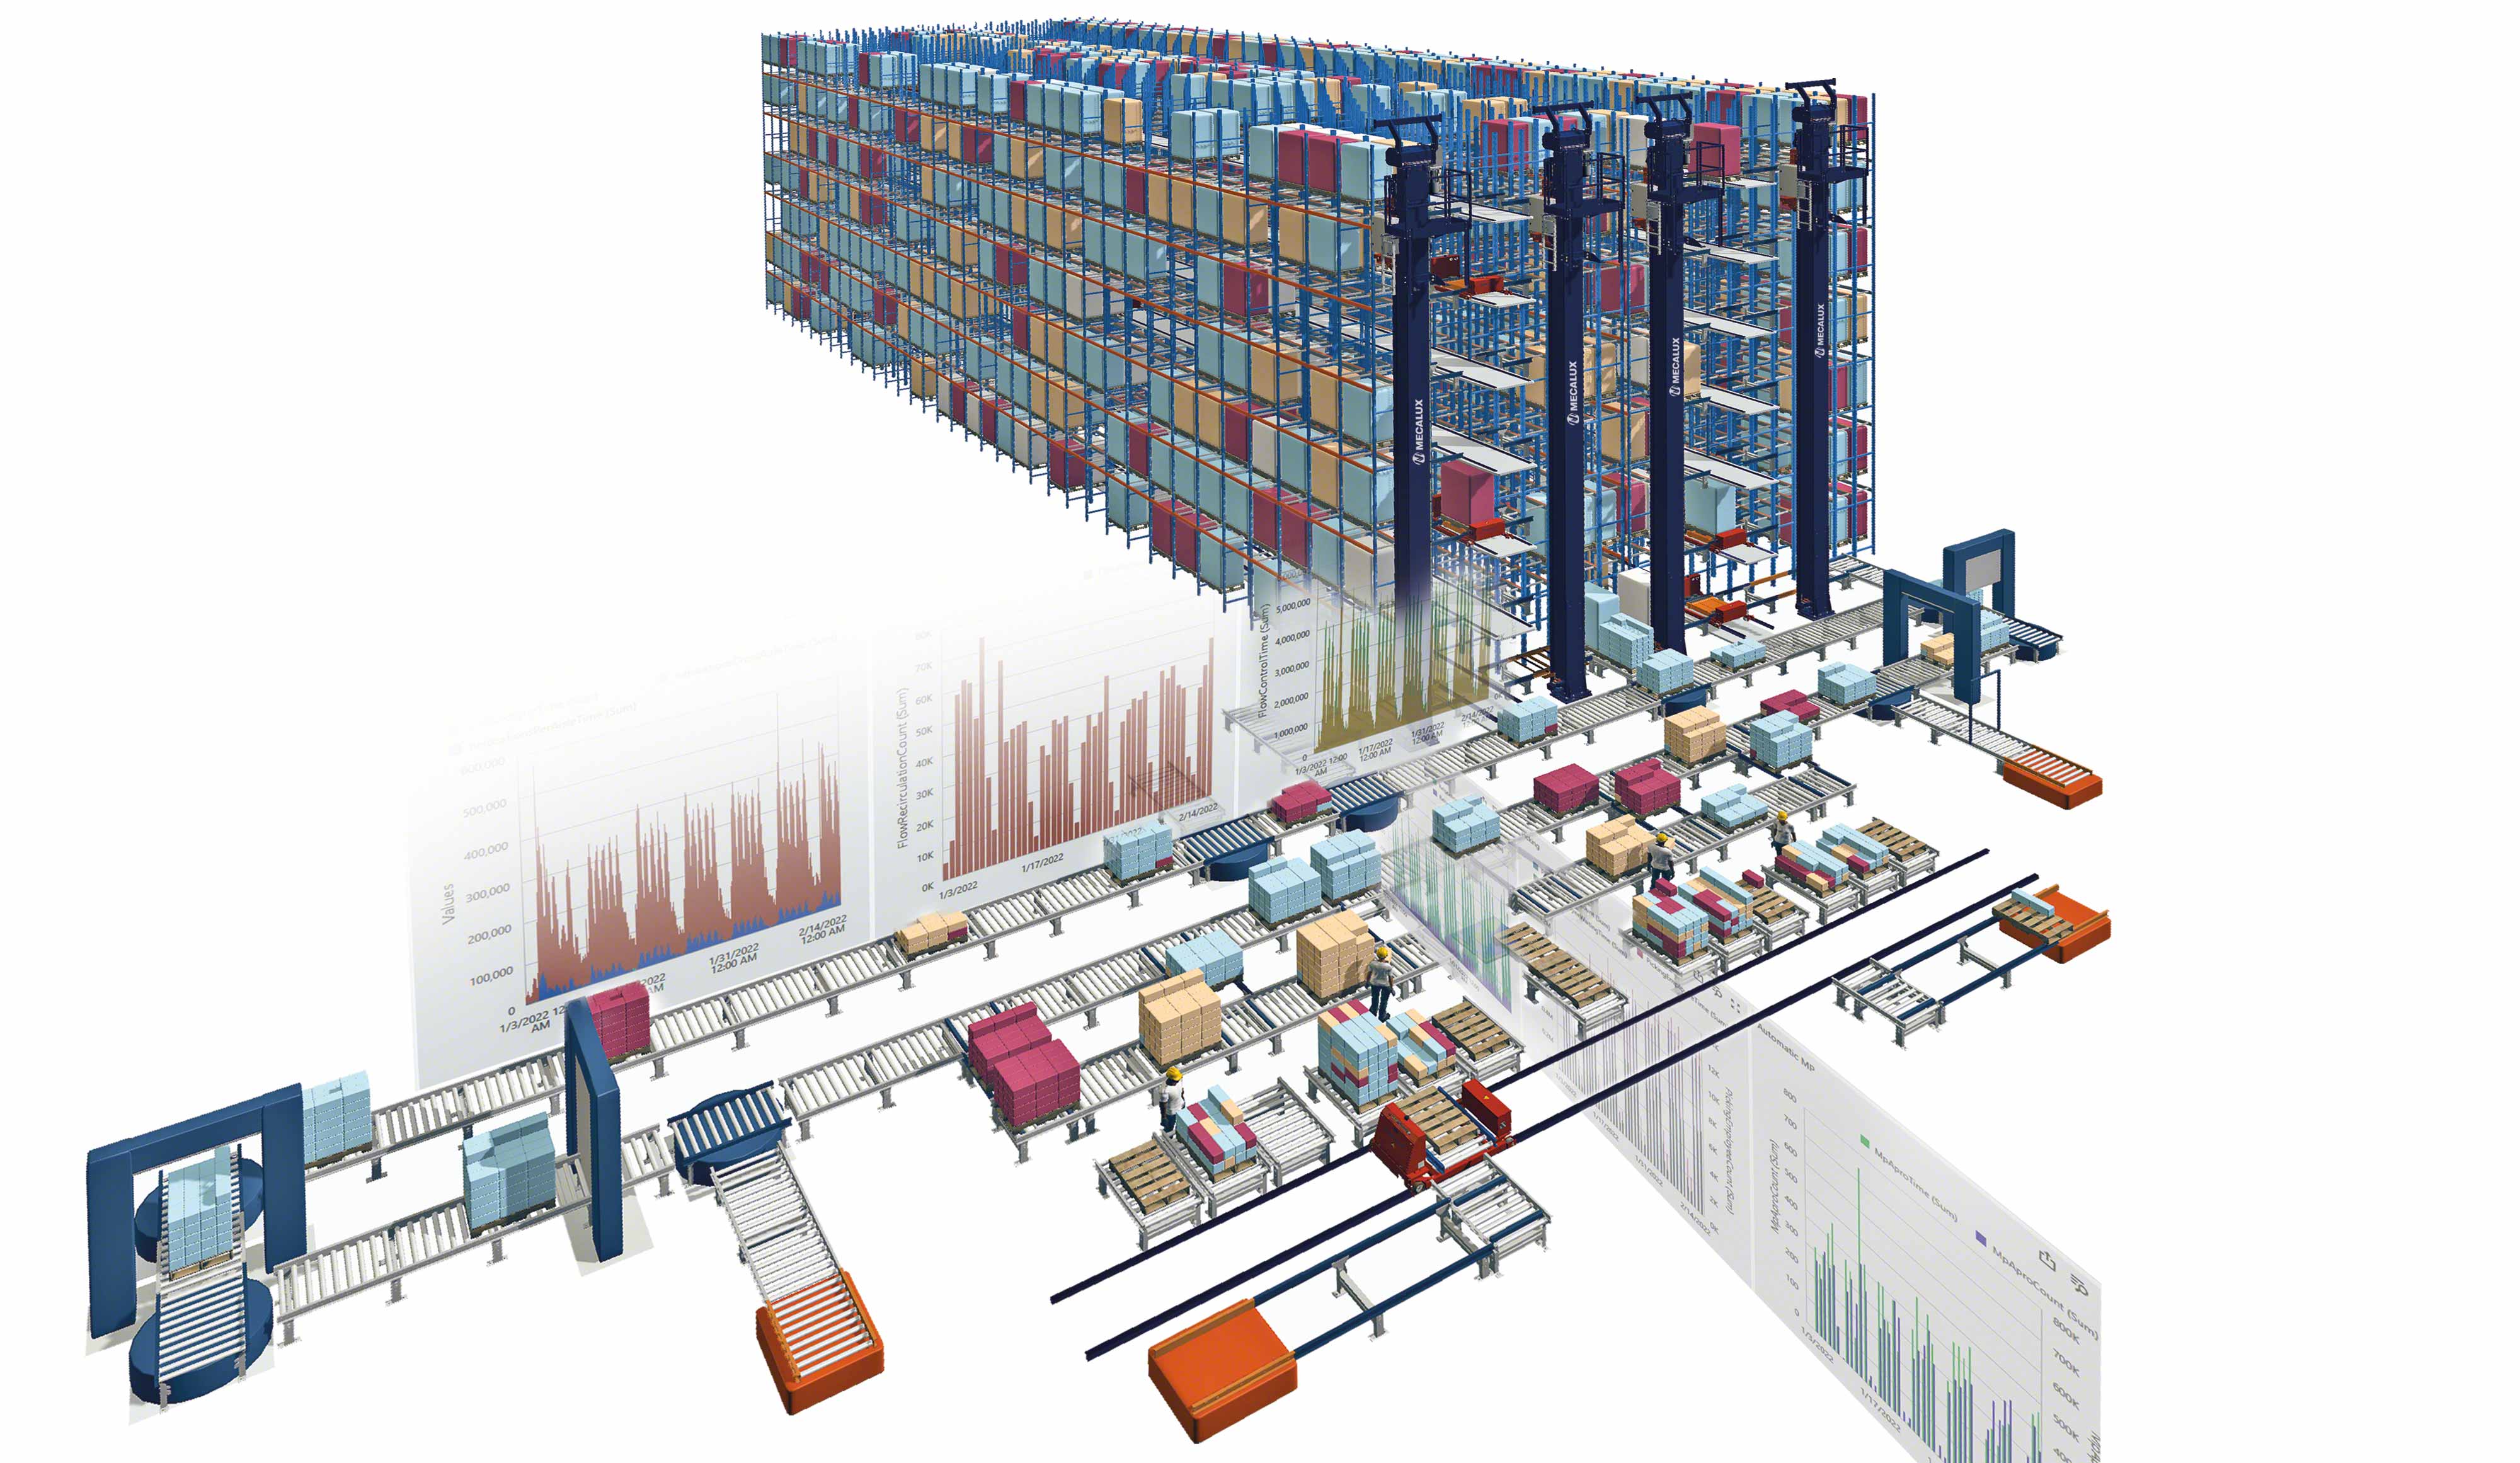 Advanced algorithms for designing the perfect warehouse